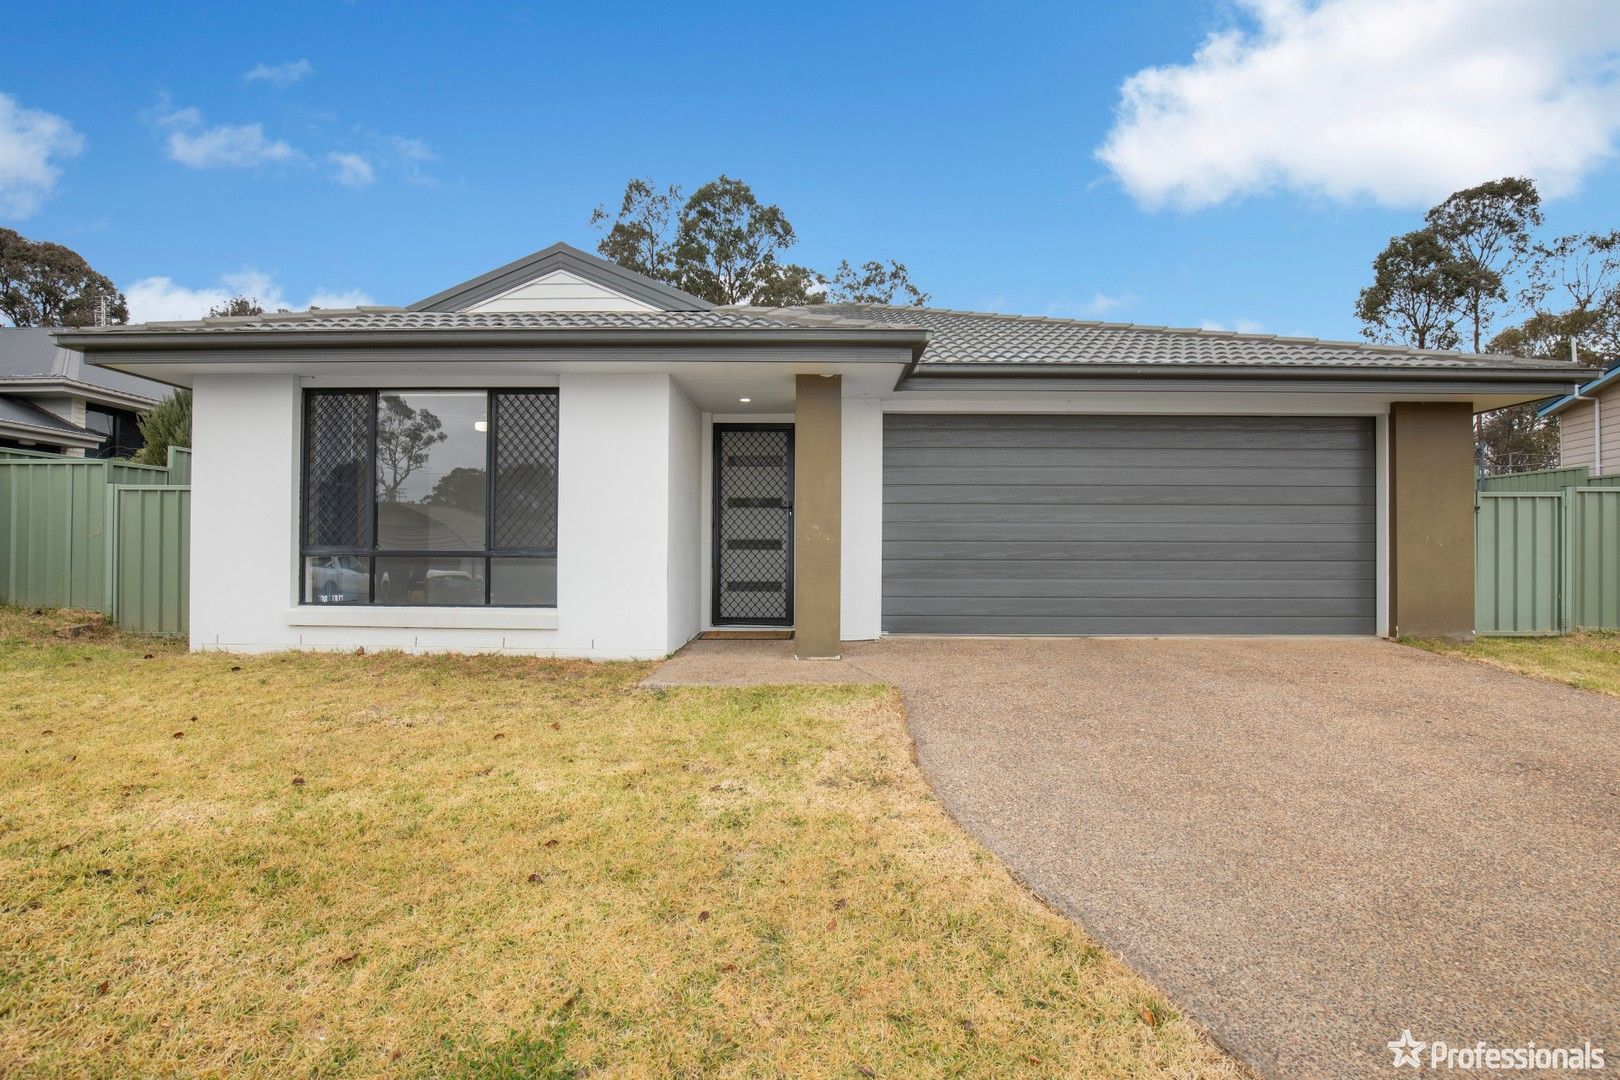 4 bedrooms House in 35 Dale Crescent ARMIDALE NSW, 2350